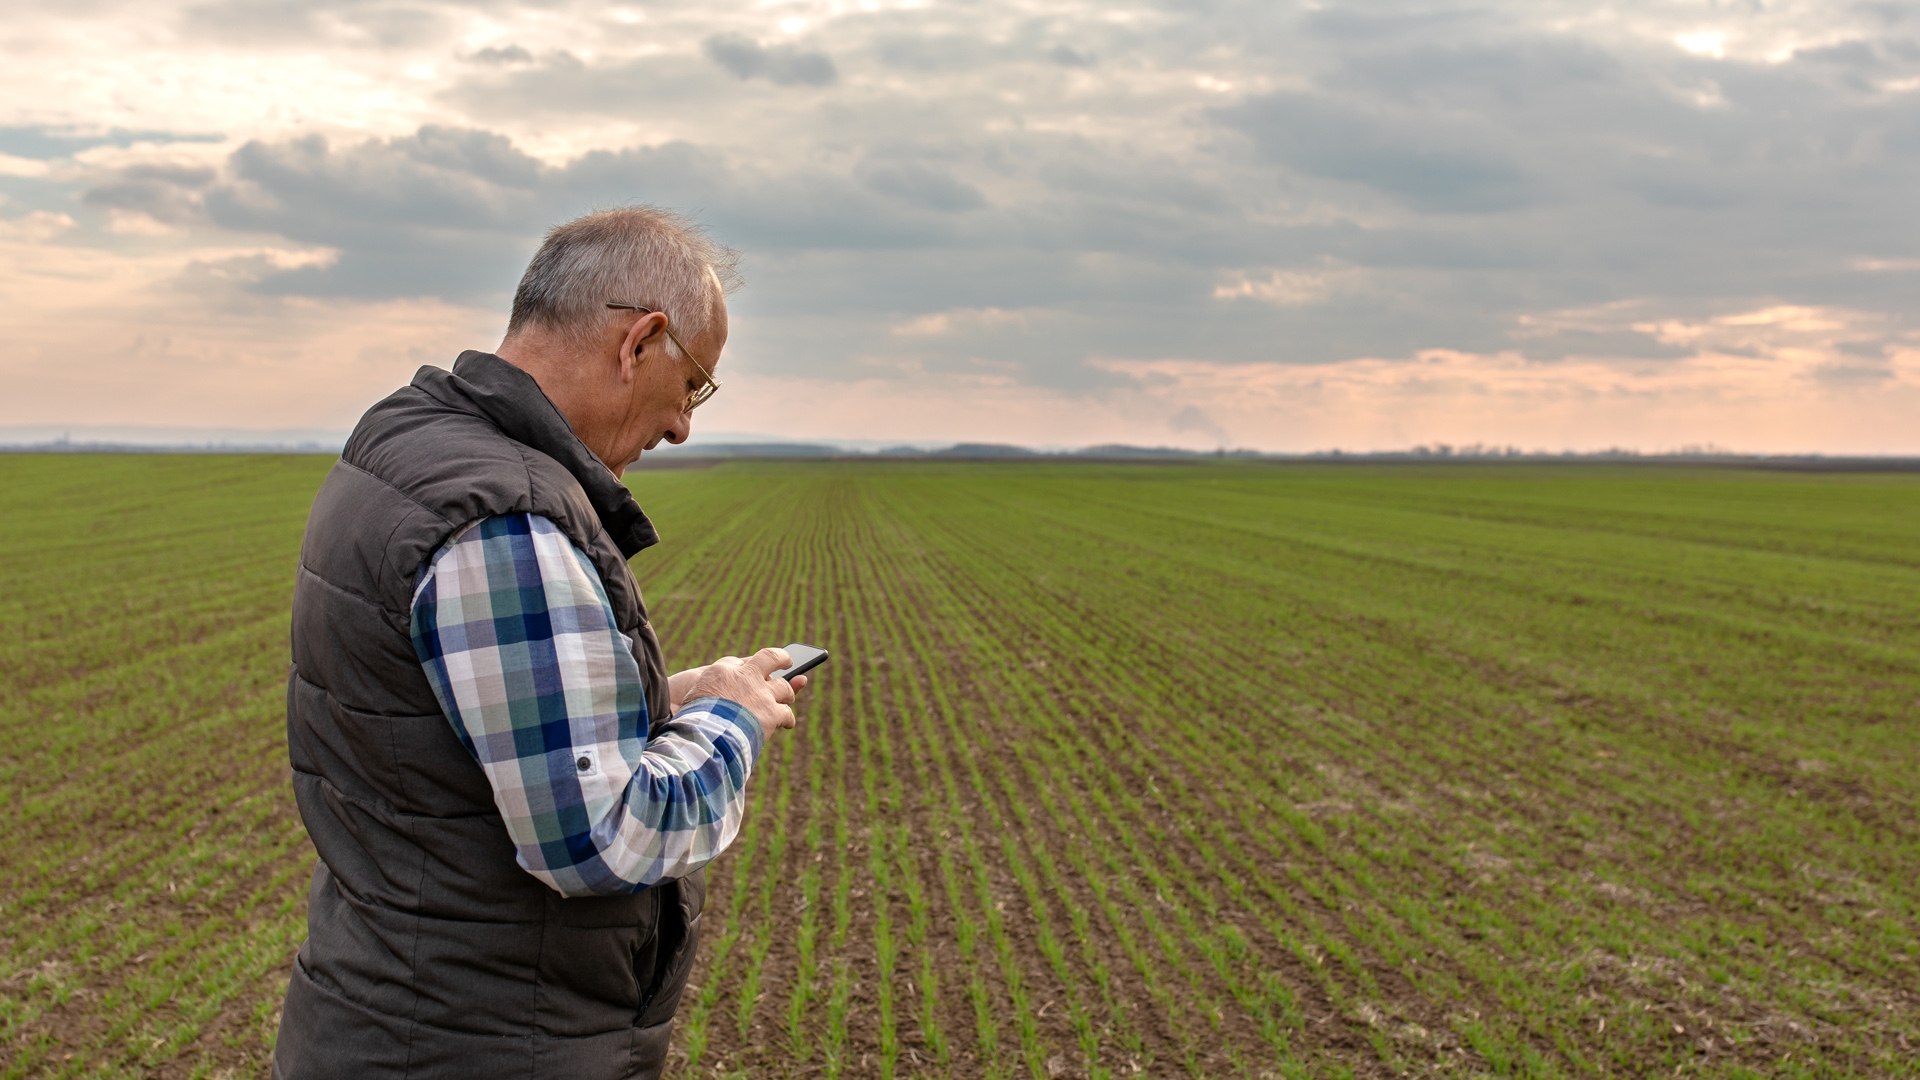 Senior farmer standing in wheat field and examining crop, man using smartphone